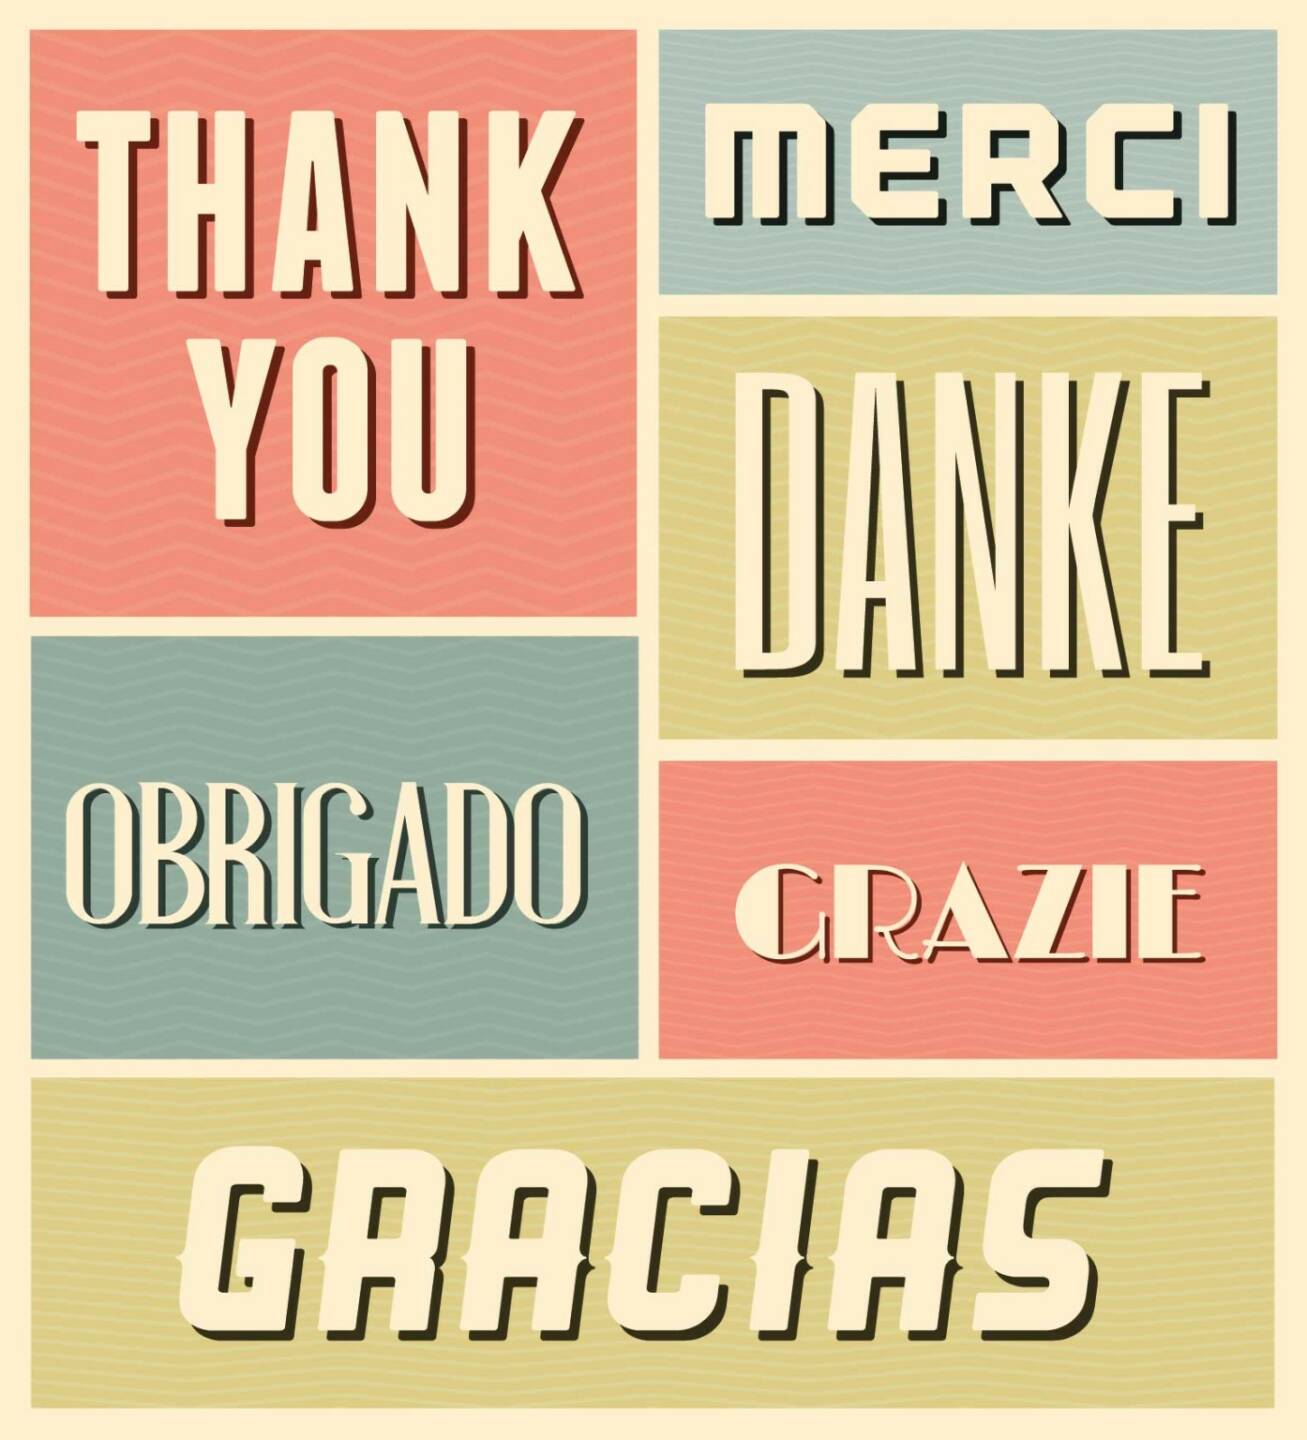 Thank You, Danke, Merci, Grazie, Obrigado http://www.shutterstock.com/de/pic-154316462/stock-vector-vintage-style-poster-with-the-words-thank-you-in-different-languages.html